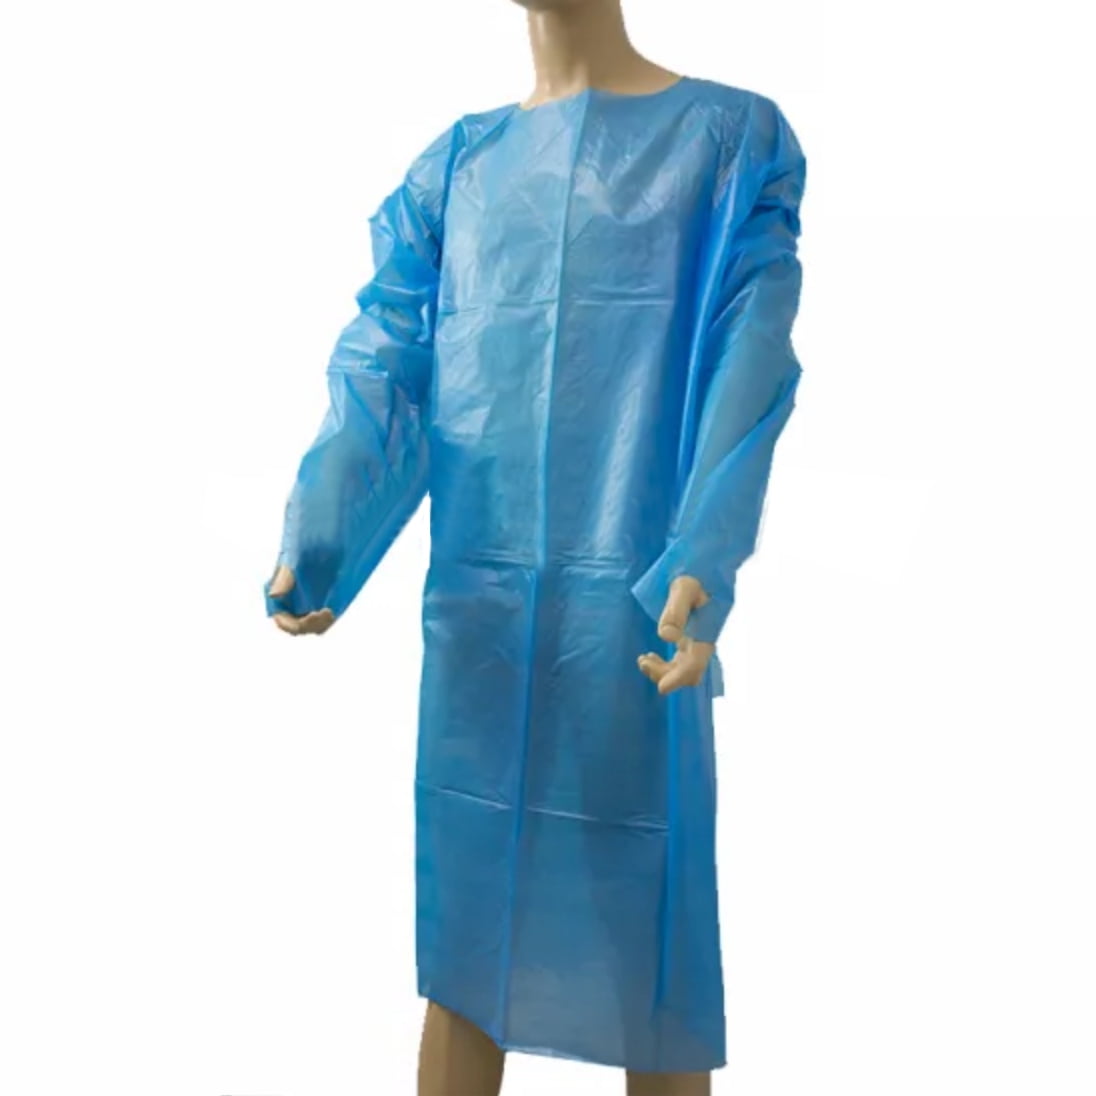 Lot Reusable Medical Dental Isolation Gown With Knit Cuff Protection Suit 